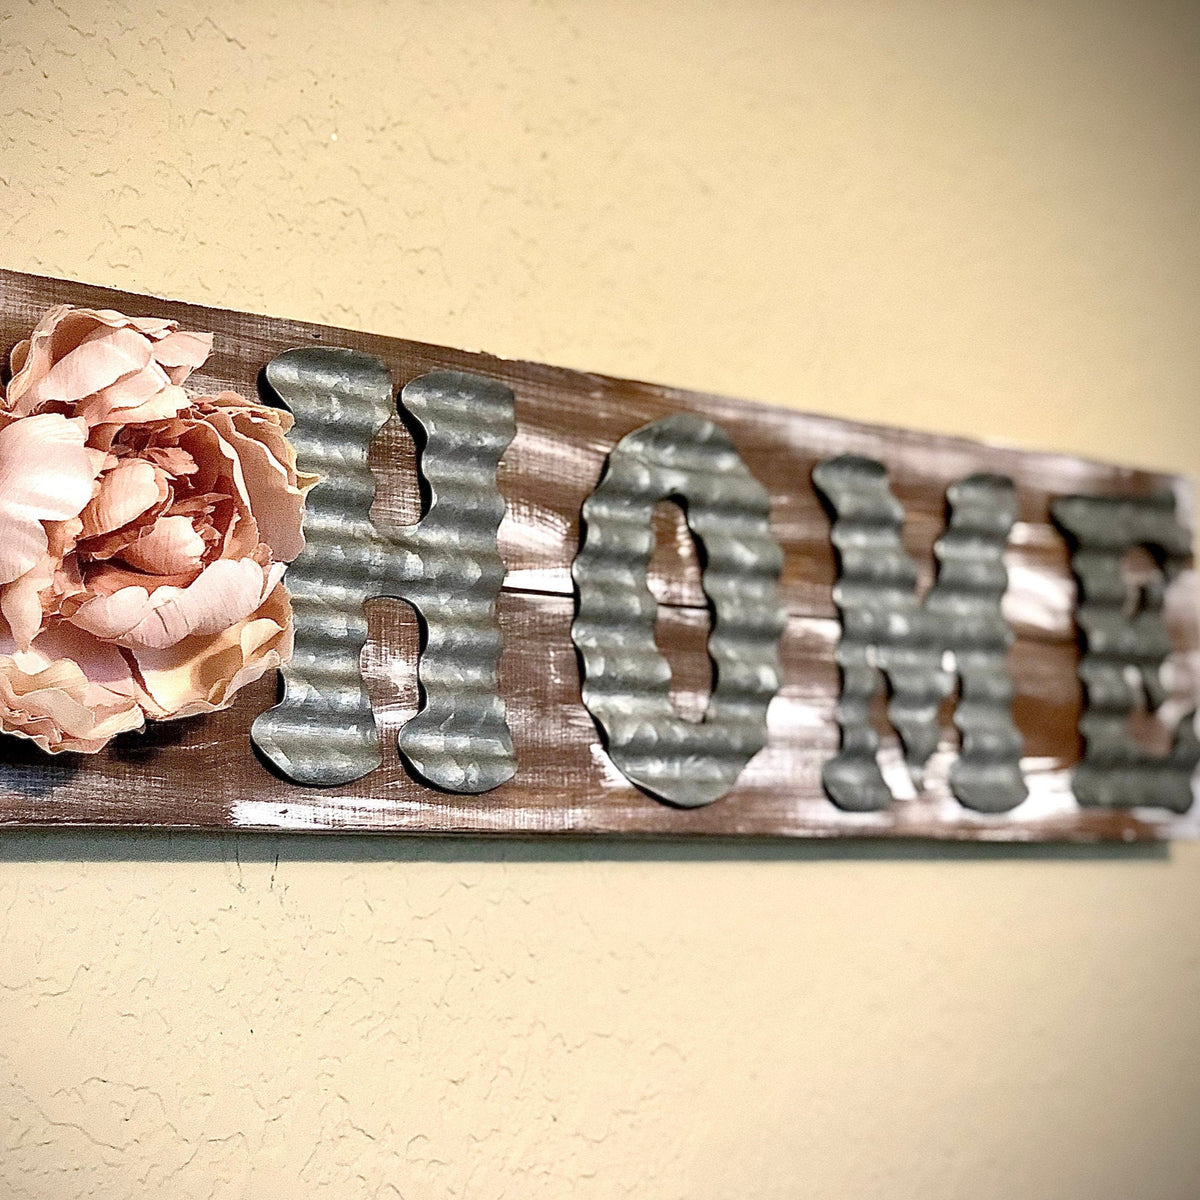 Painted metal letters for wall decor- Rustic home decor for